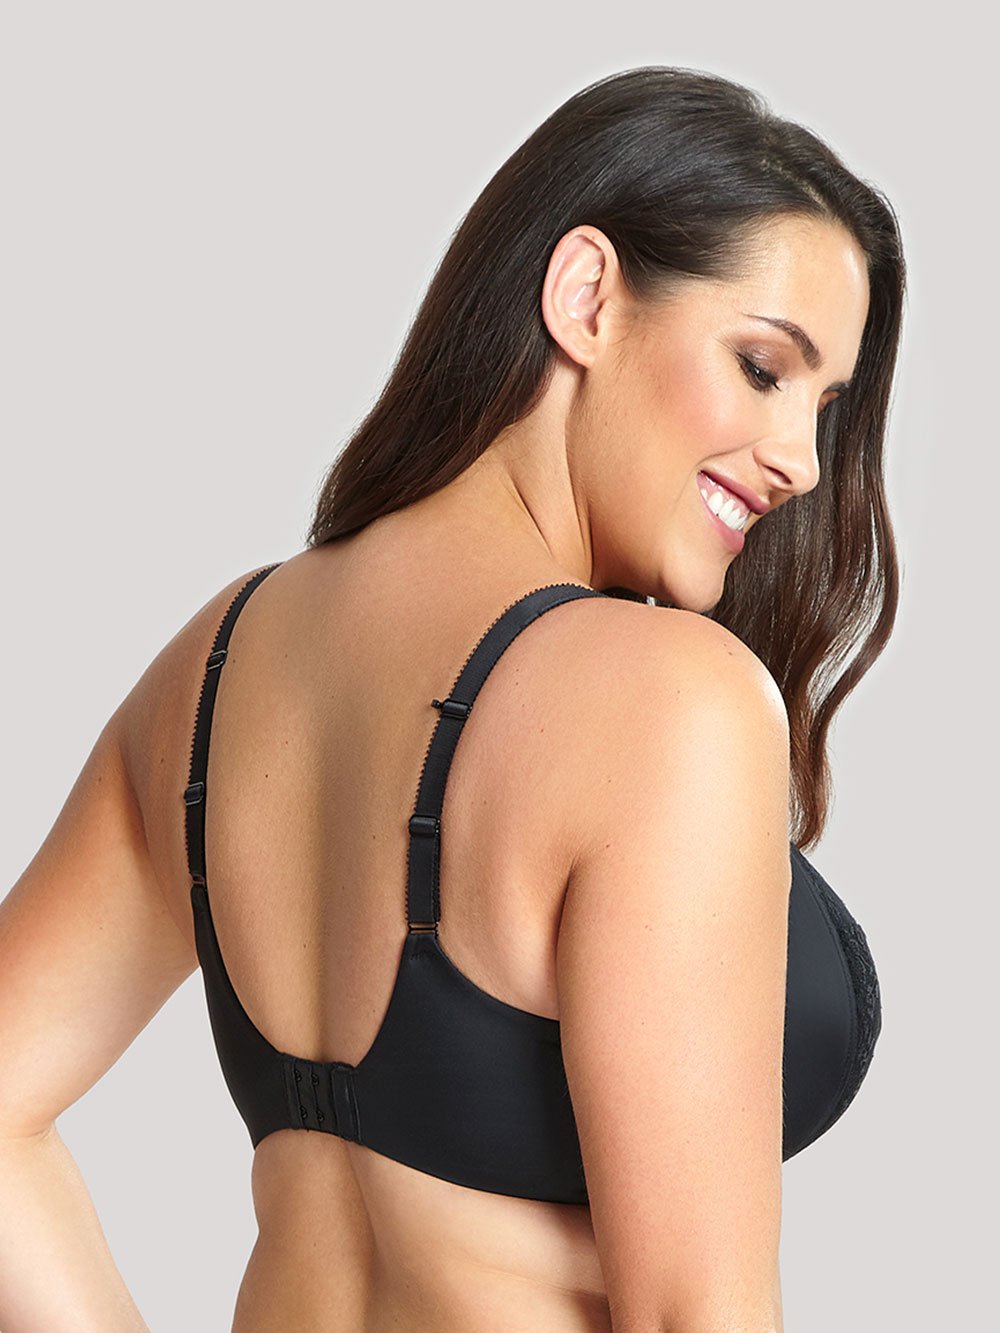 32C Bras: Bra Cup Size for 32C Boobs and Breast Size Étiqueté Sports Bras  - HauteFlair